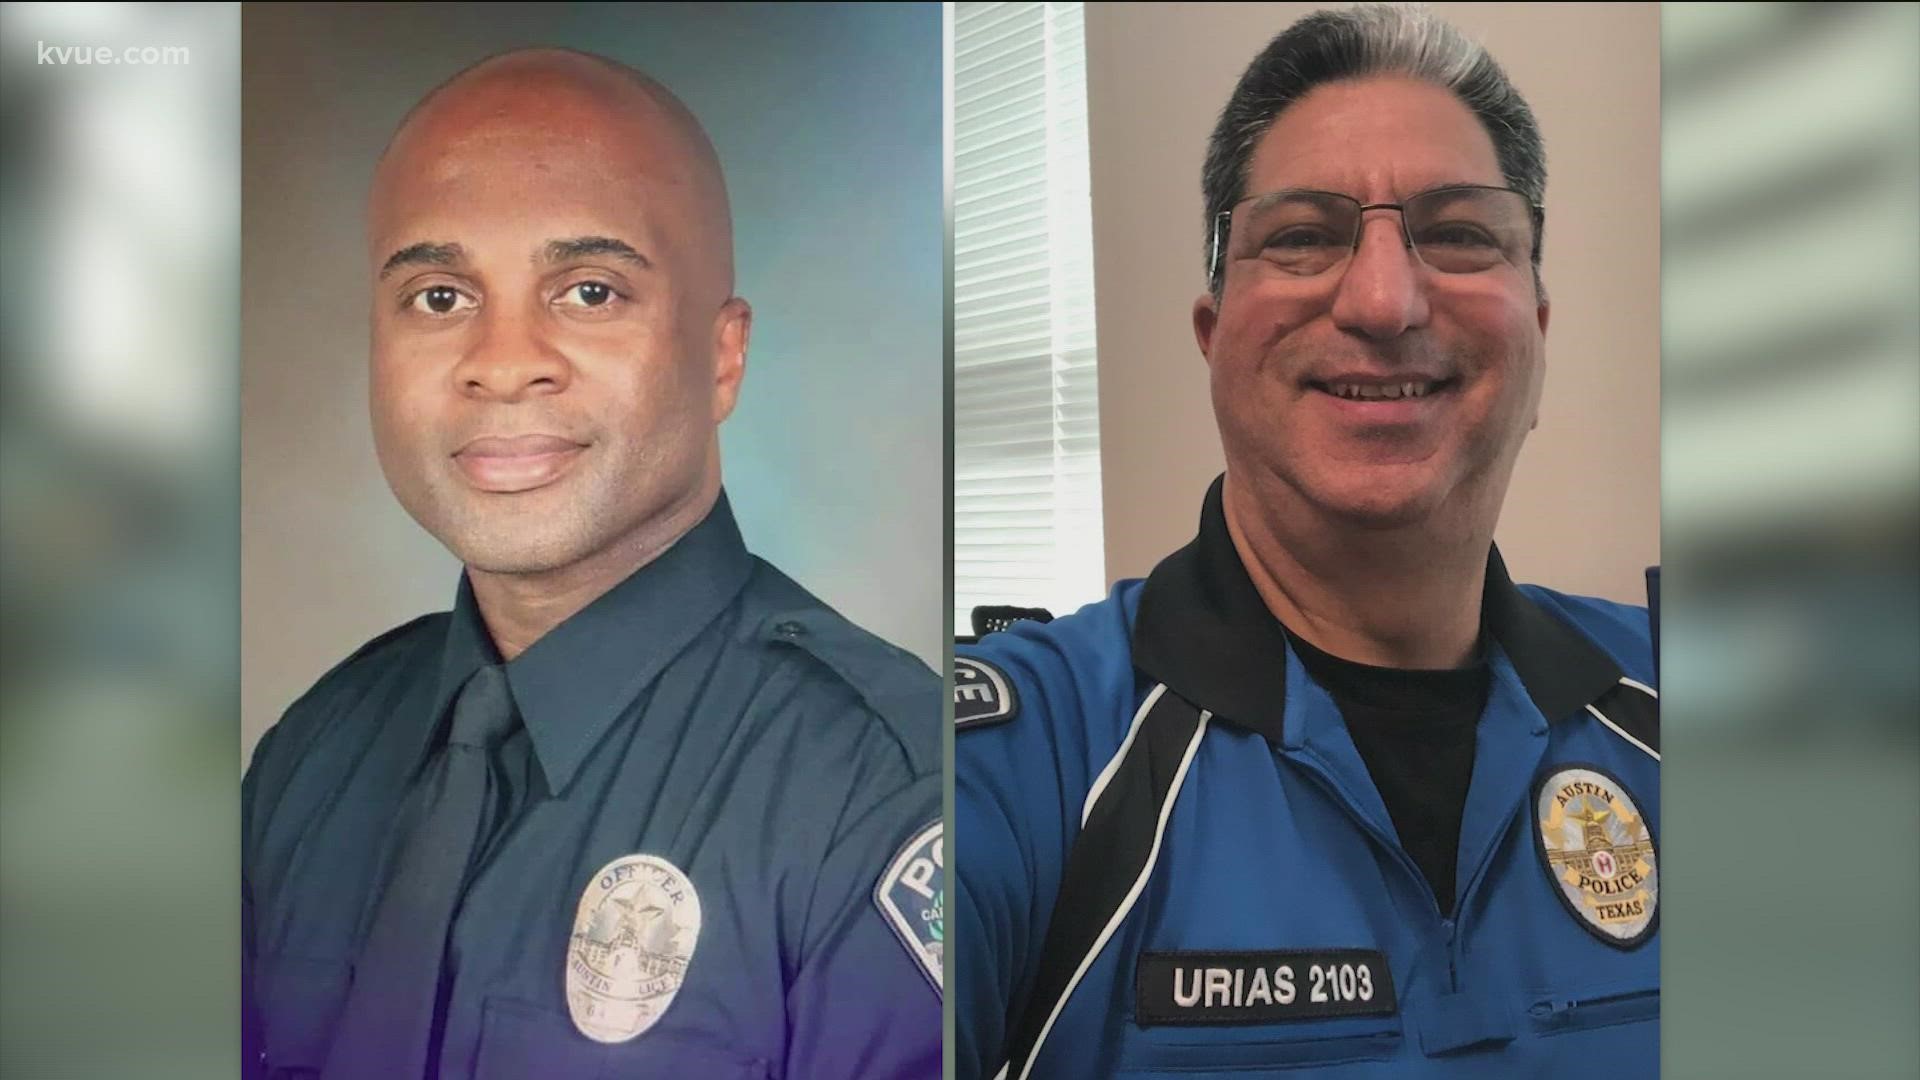 Two Austin Police Department officers died of COVID-19 this week, the first coronavirus-related deaths in the department.